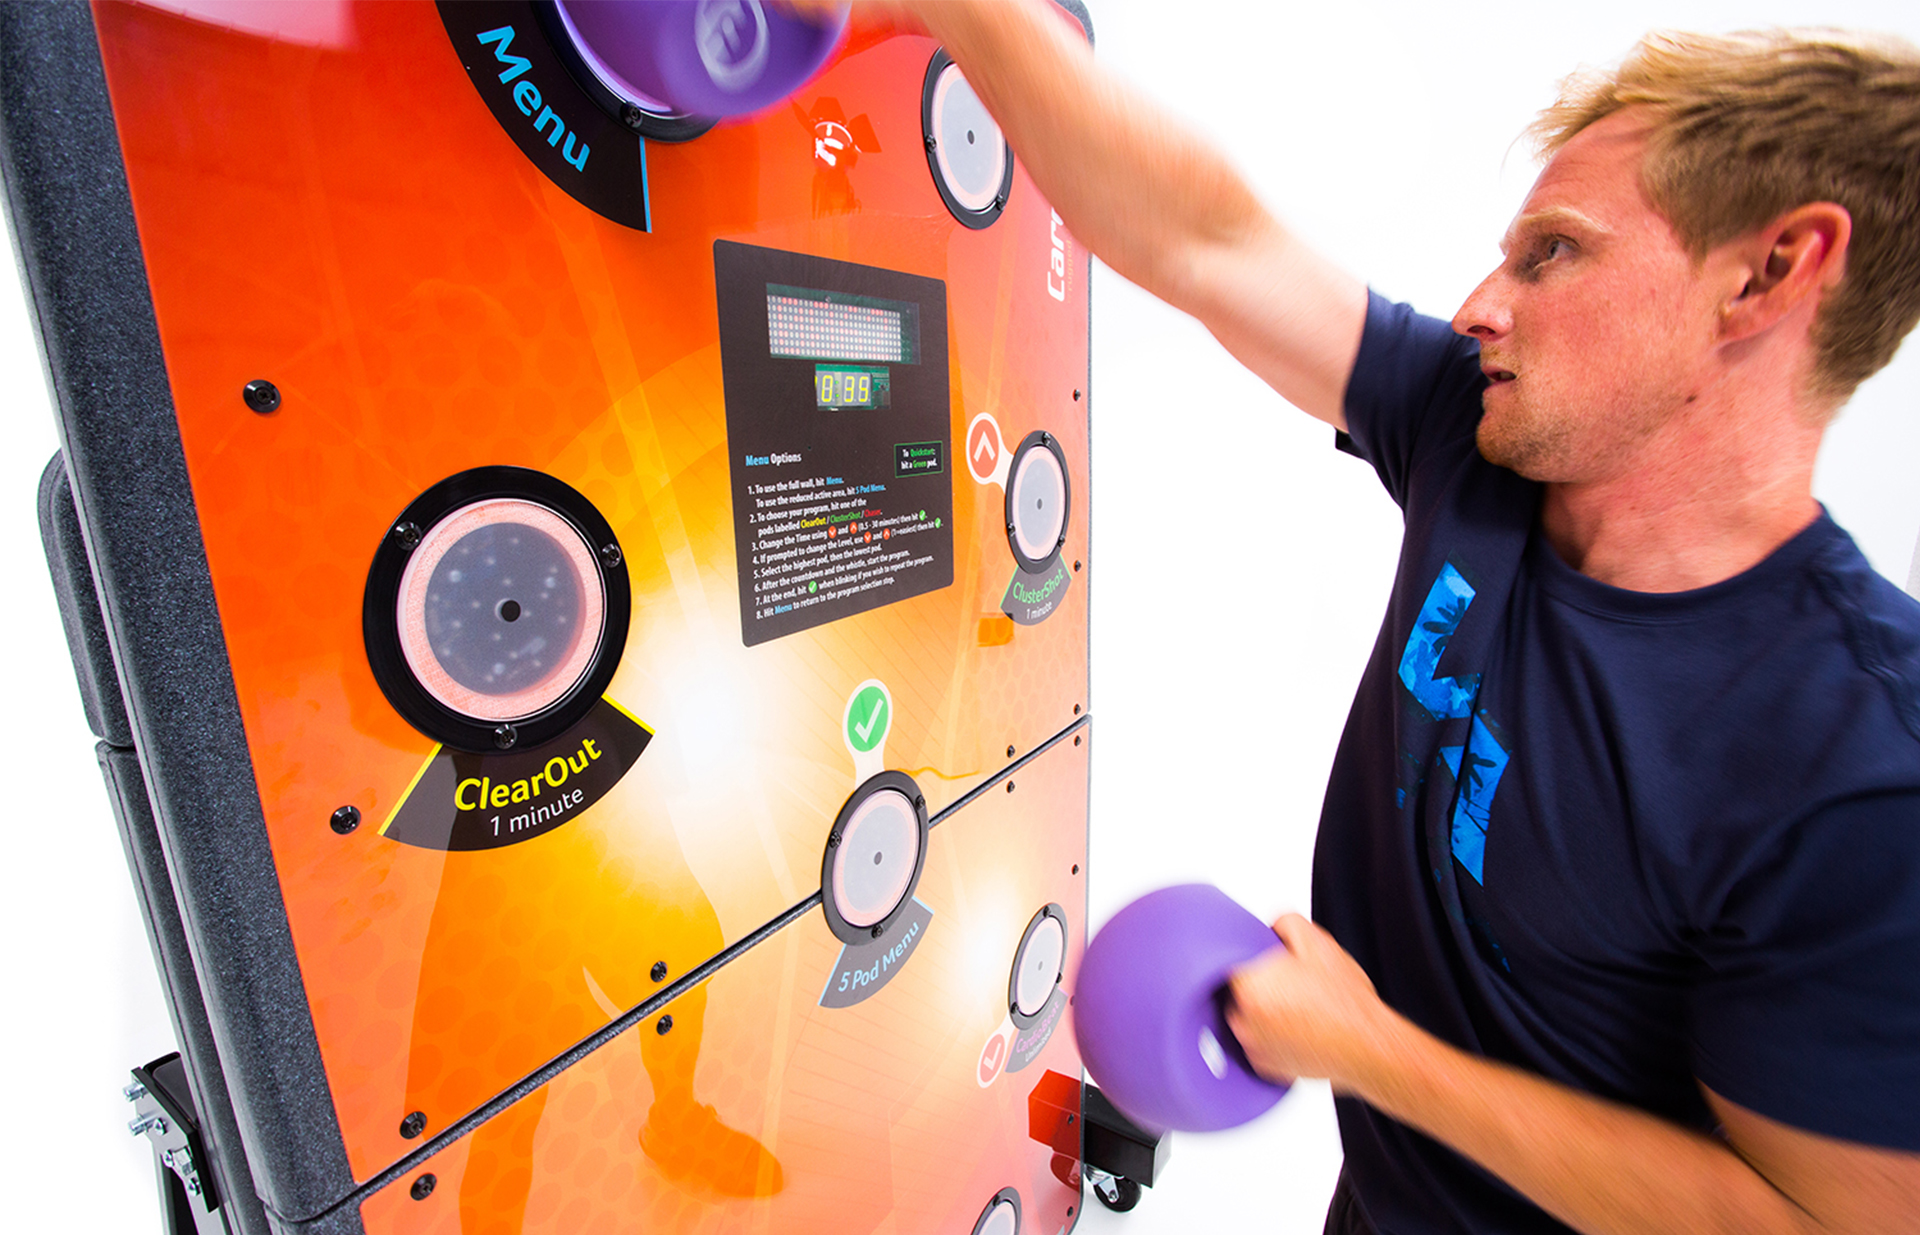 Fun and motivational fitness equipment for all abilities